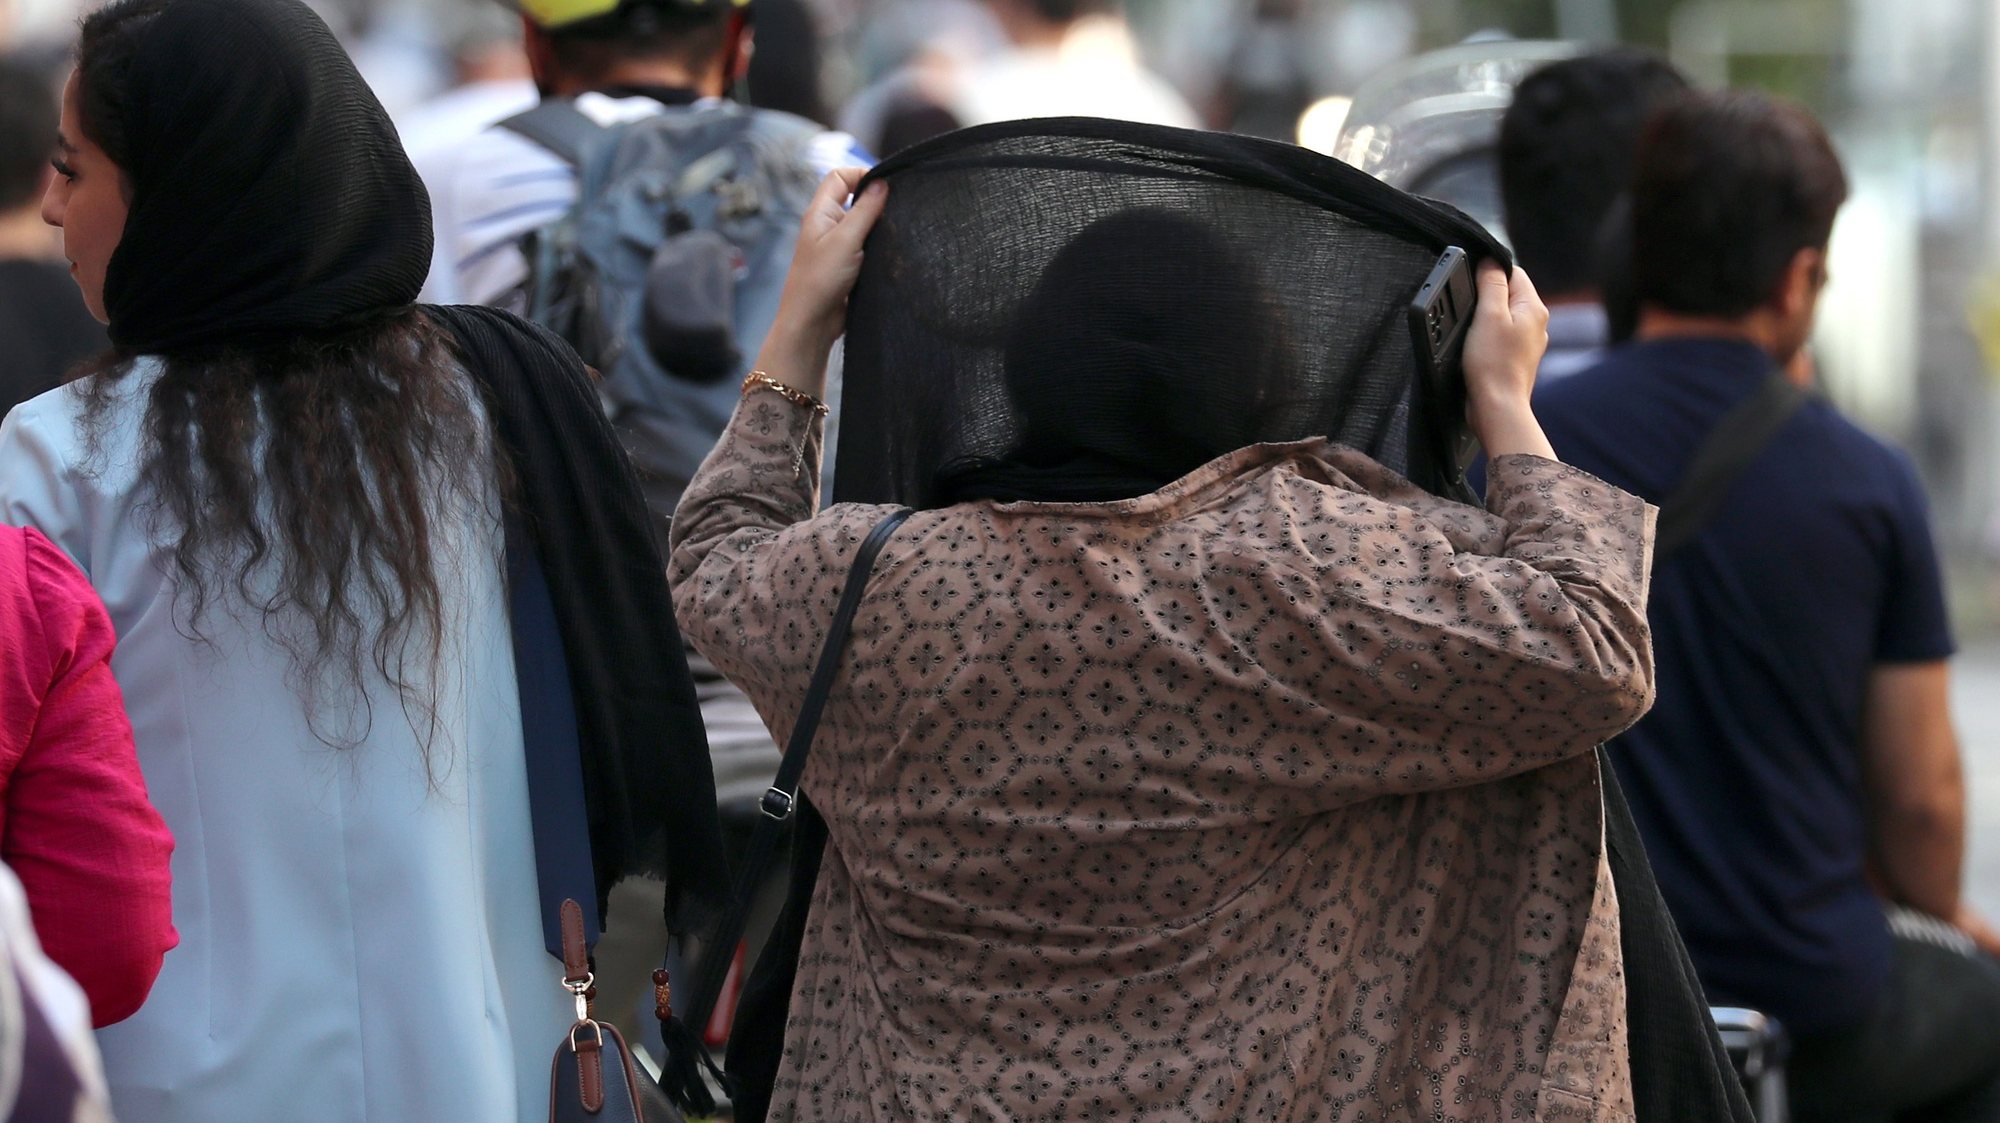 epa10793377 An Iranian woman adjusts her scarf as she walks in the street in Tehran, Iran, 10 August 2023. Iranâ€™s President Ebrahim Raisi on 09 August vowed that the Islamic Republicâ€™s mandatory dress code, including laws requiring women to wear the hijab, will be enforced. The statement came a month before the first anniversary of Mahsa Aminiâ€™s death in police custody, following her arrest for not wearing the hijab properly. Since then, a growing number of women in the country have been defying authorities by removing the headscarf.  EPA/ABEDIN TAHERKENAREH